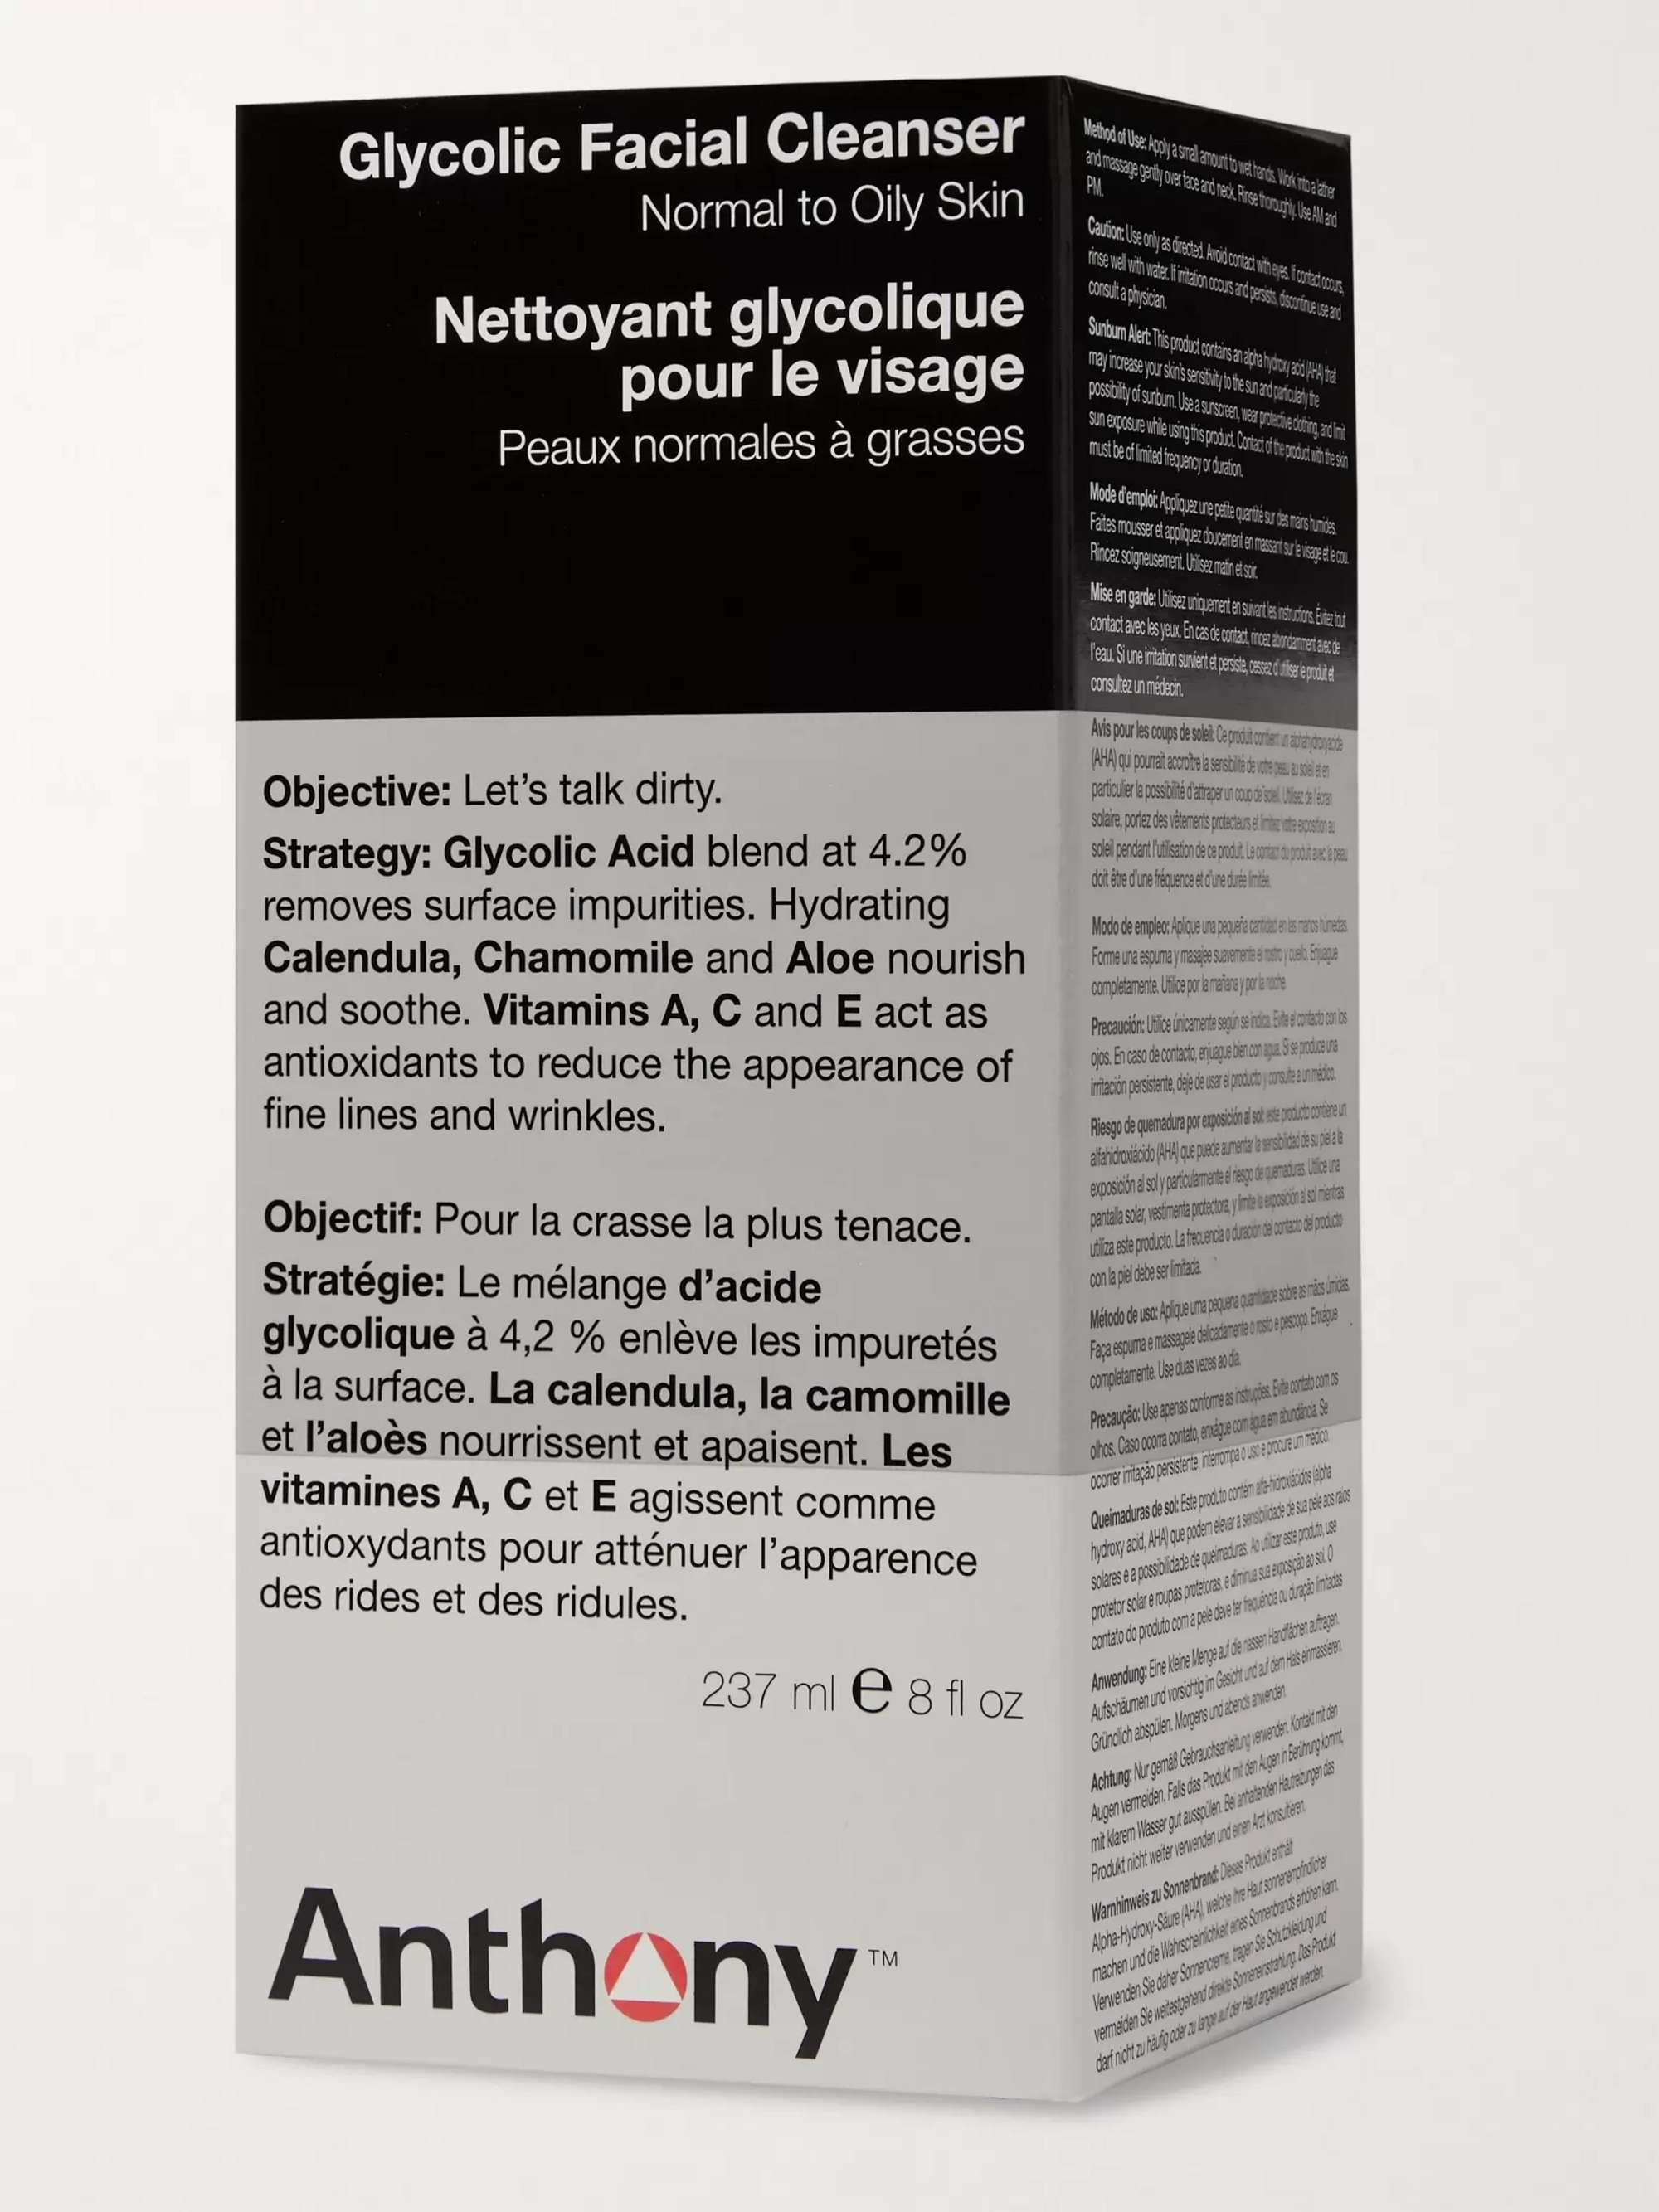 ANTHONY Glycolic Facial Cleanser, 237ml